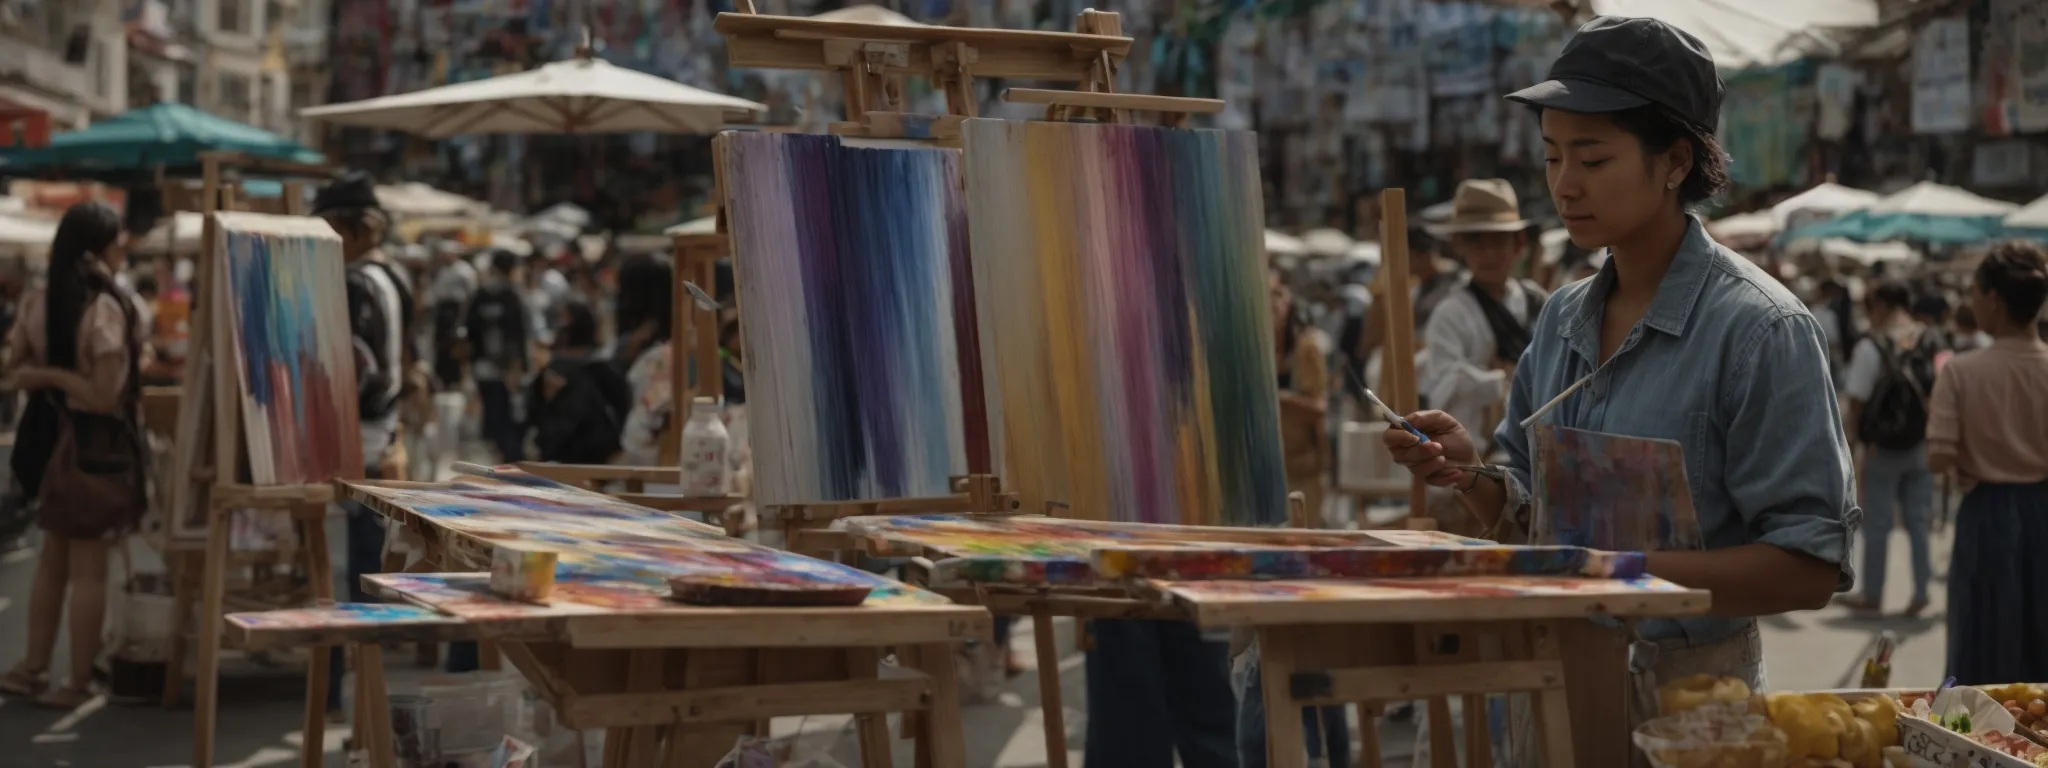 a painter stands before an easel, brushing vibrant strokes onto a canvas in a bustling open-air market.